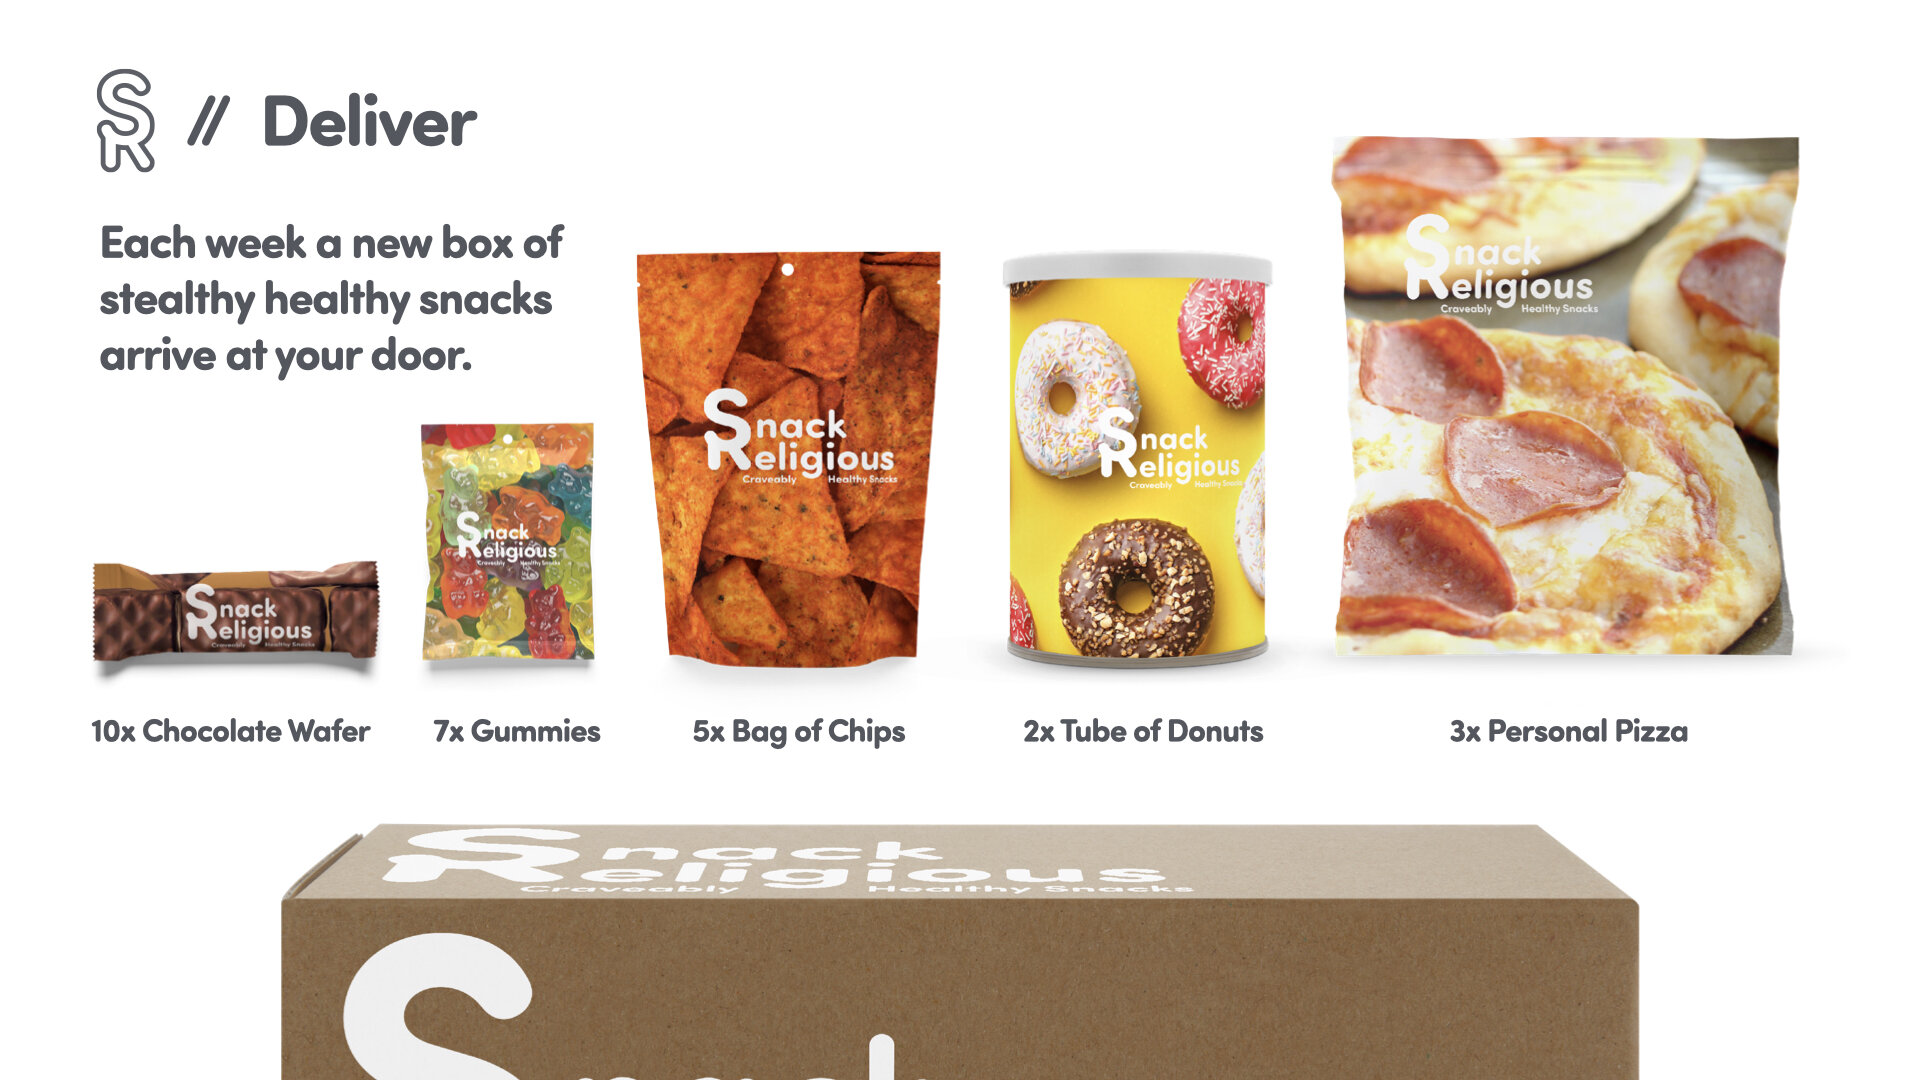 deliver. each week a new box of snacks arrives at your door.